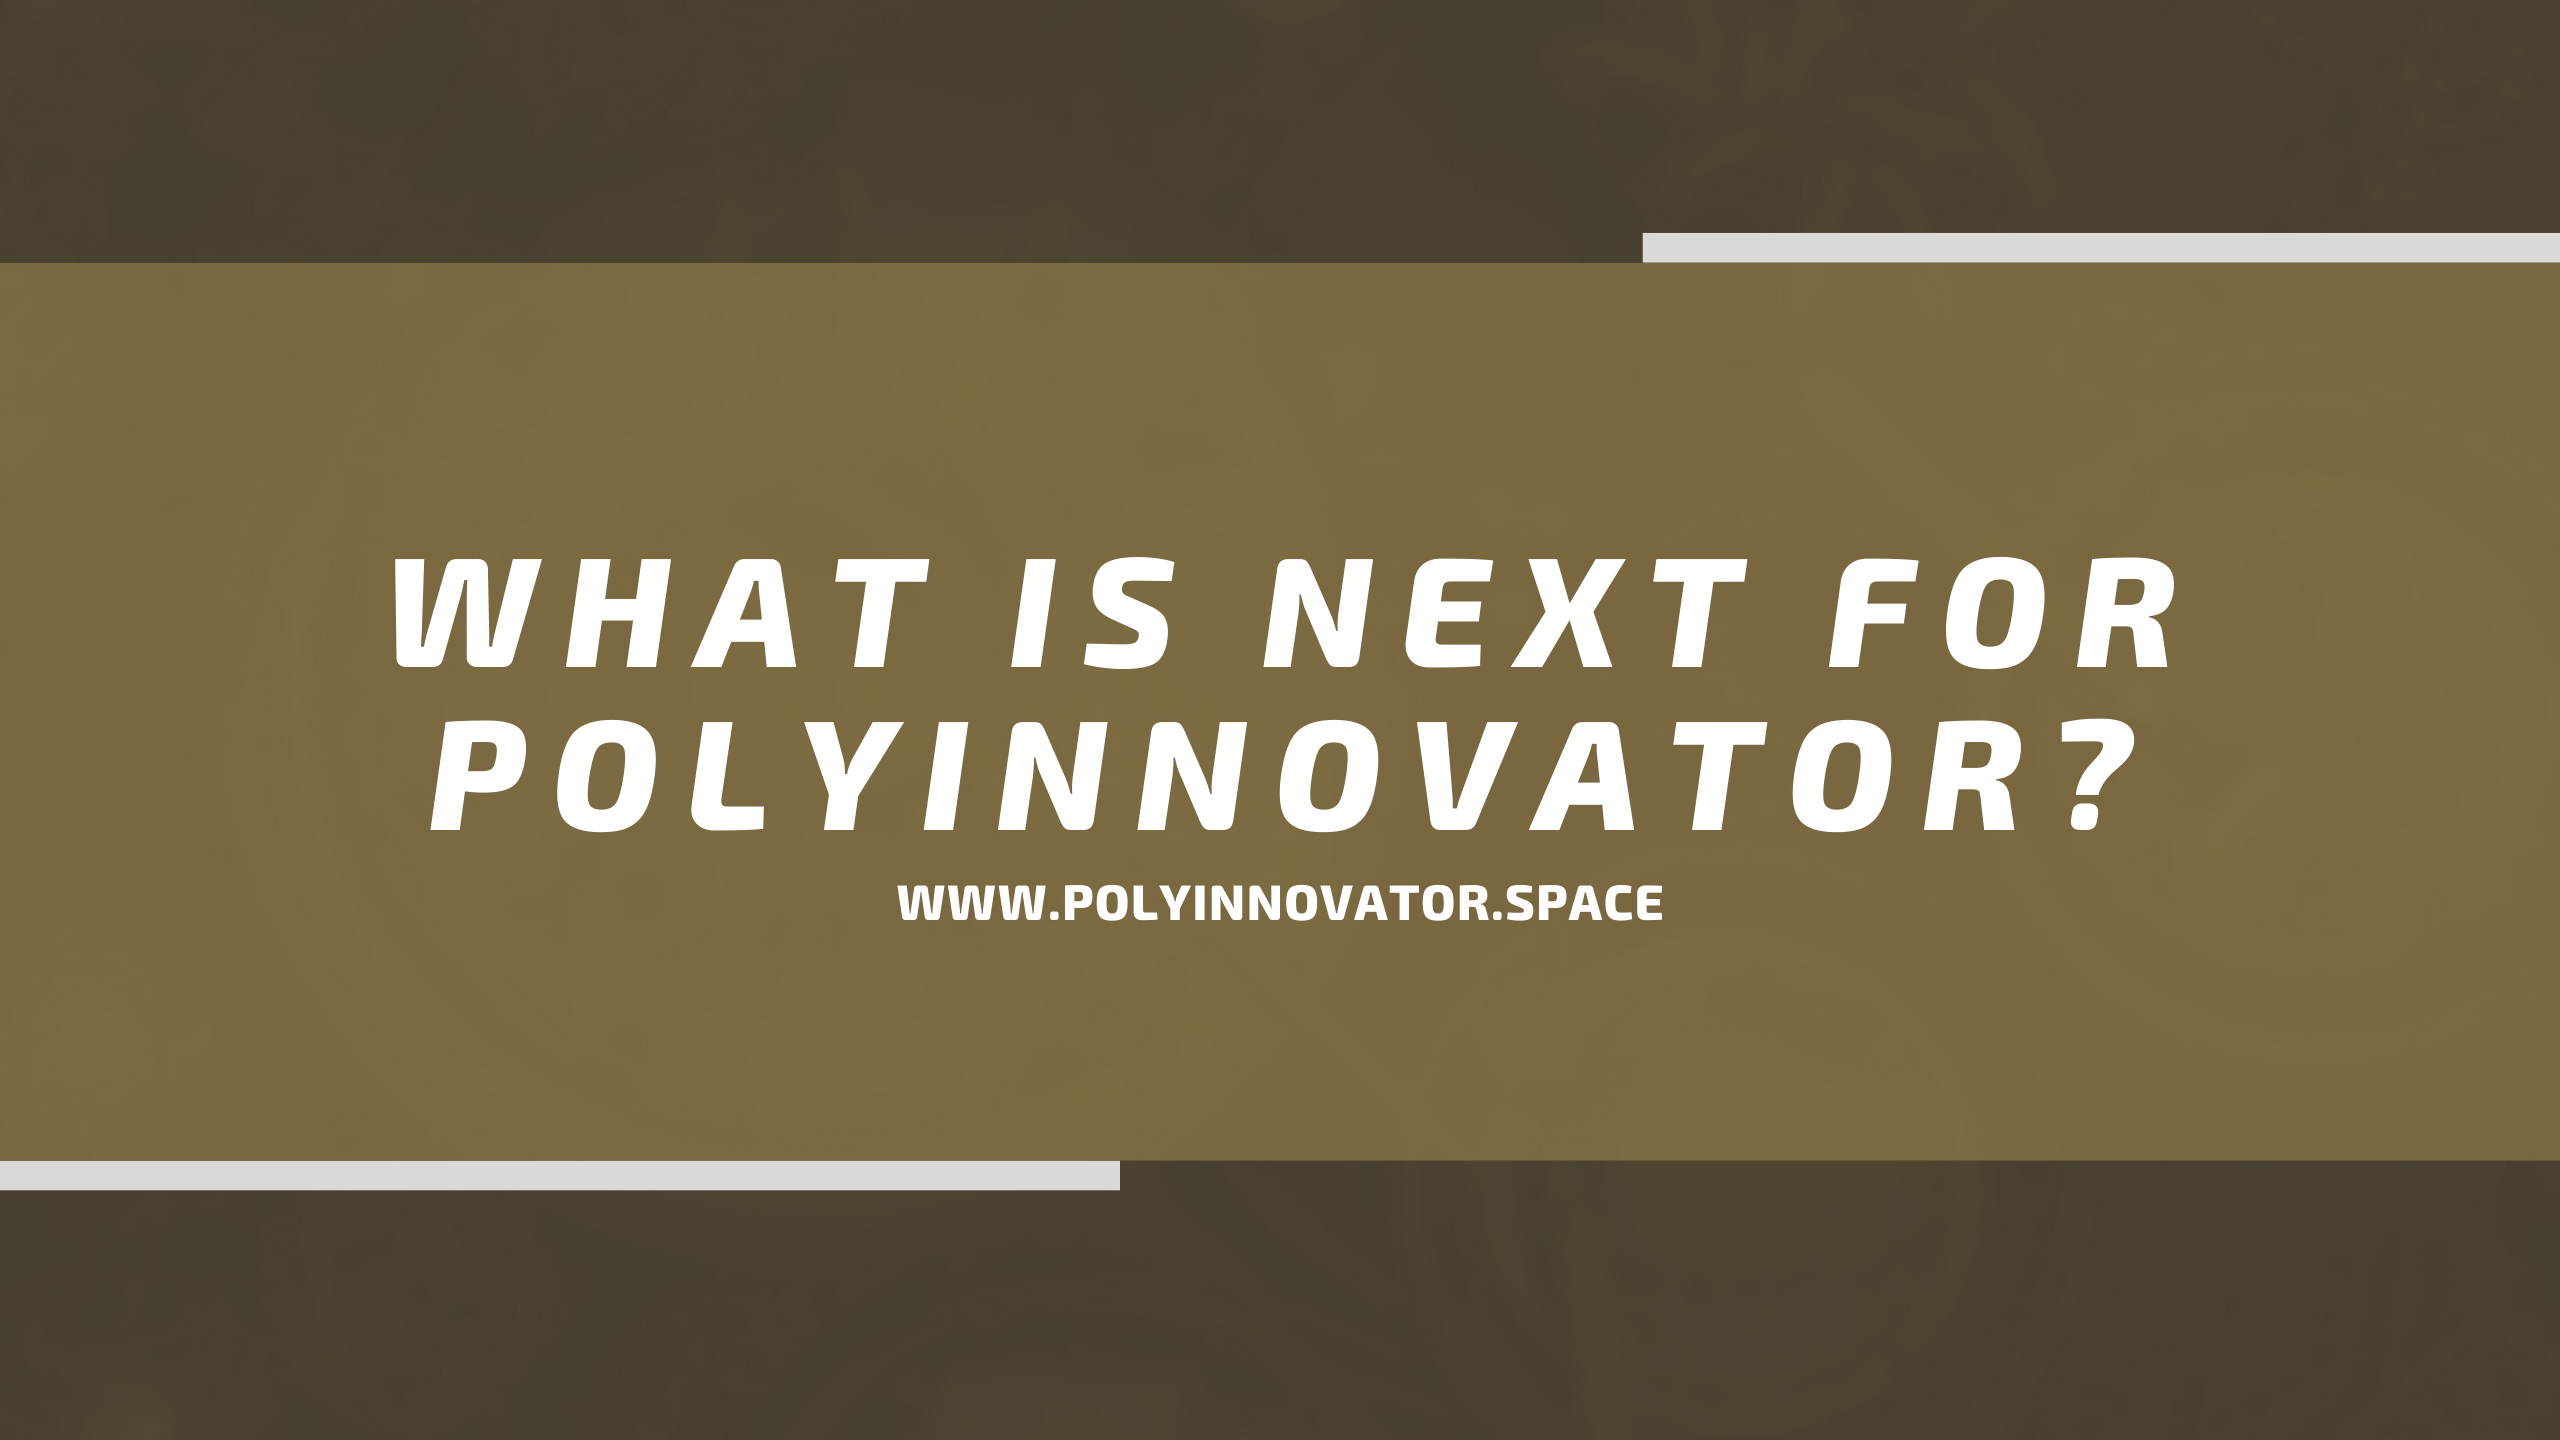 What is NEXT for PolyInnovator?